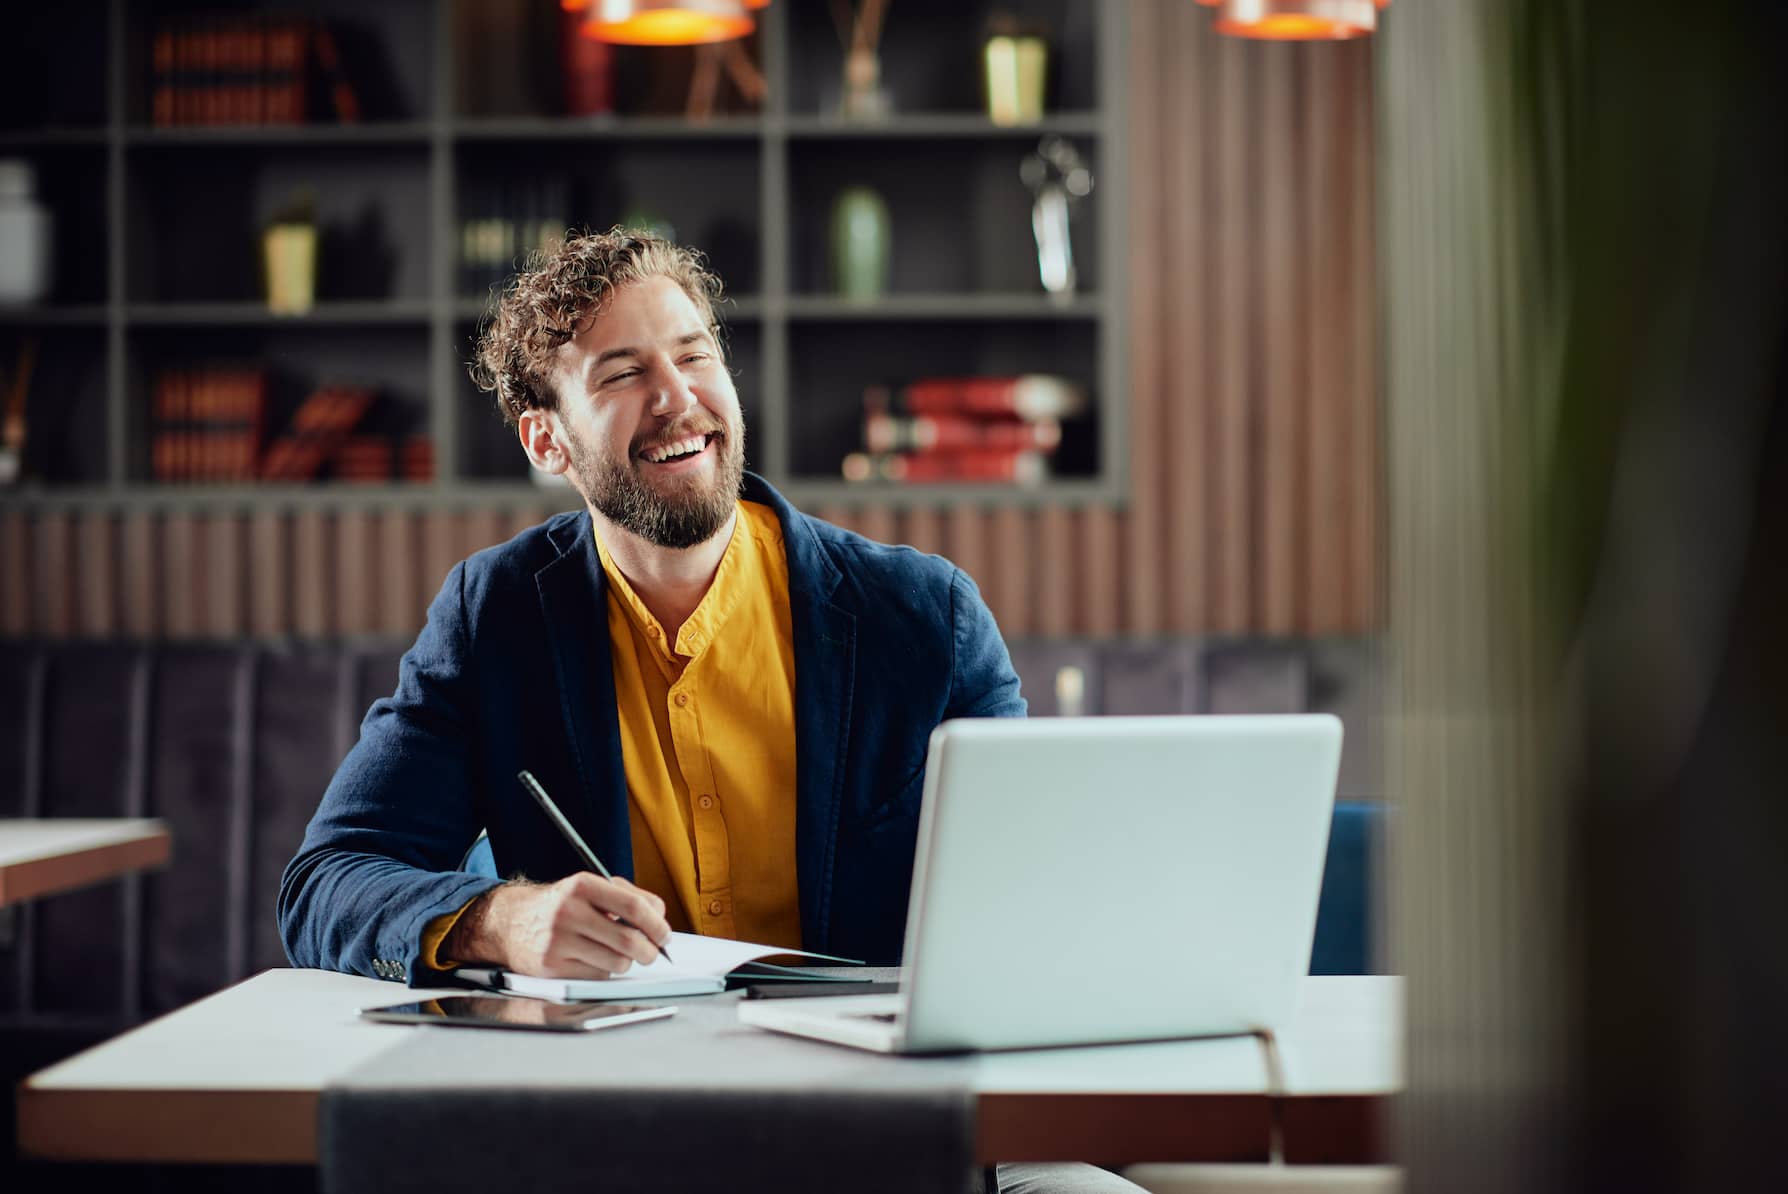 Young smiling bearded man dressed casual writing notes in agenda and looking at laptop while sitting in a table.